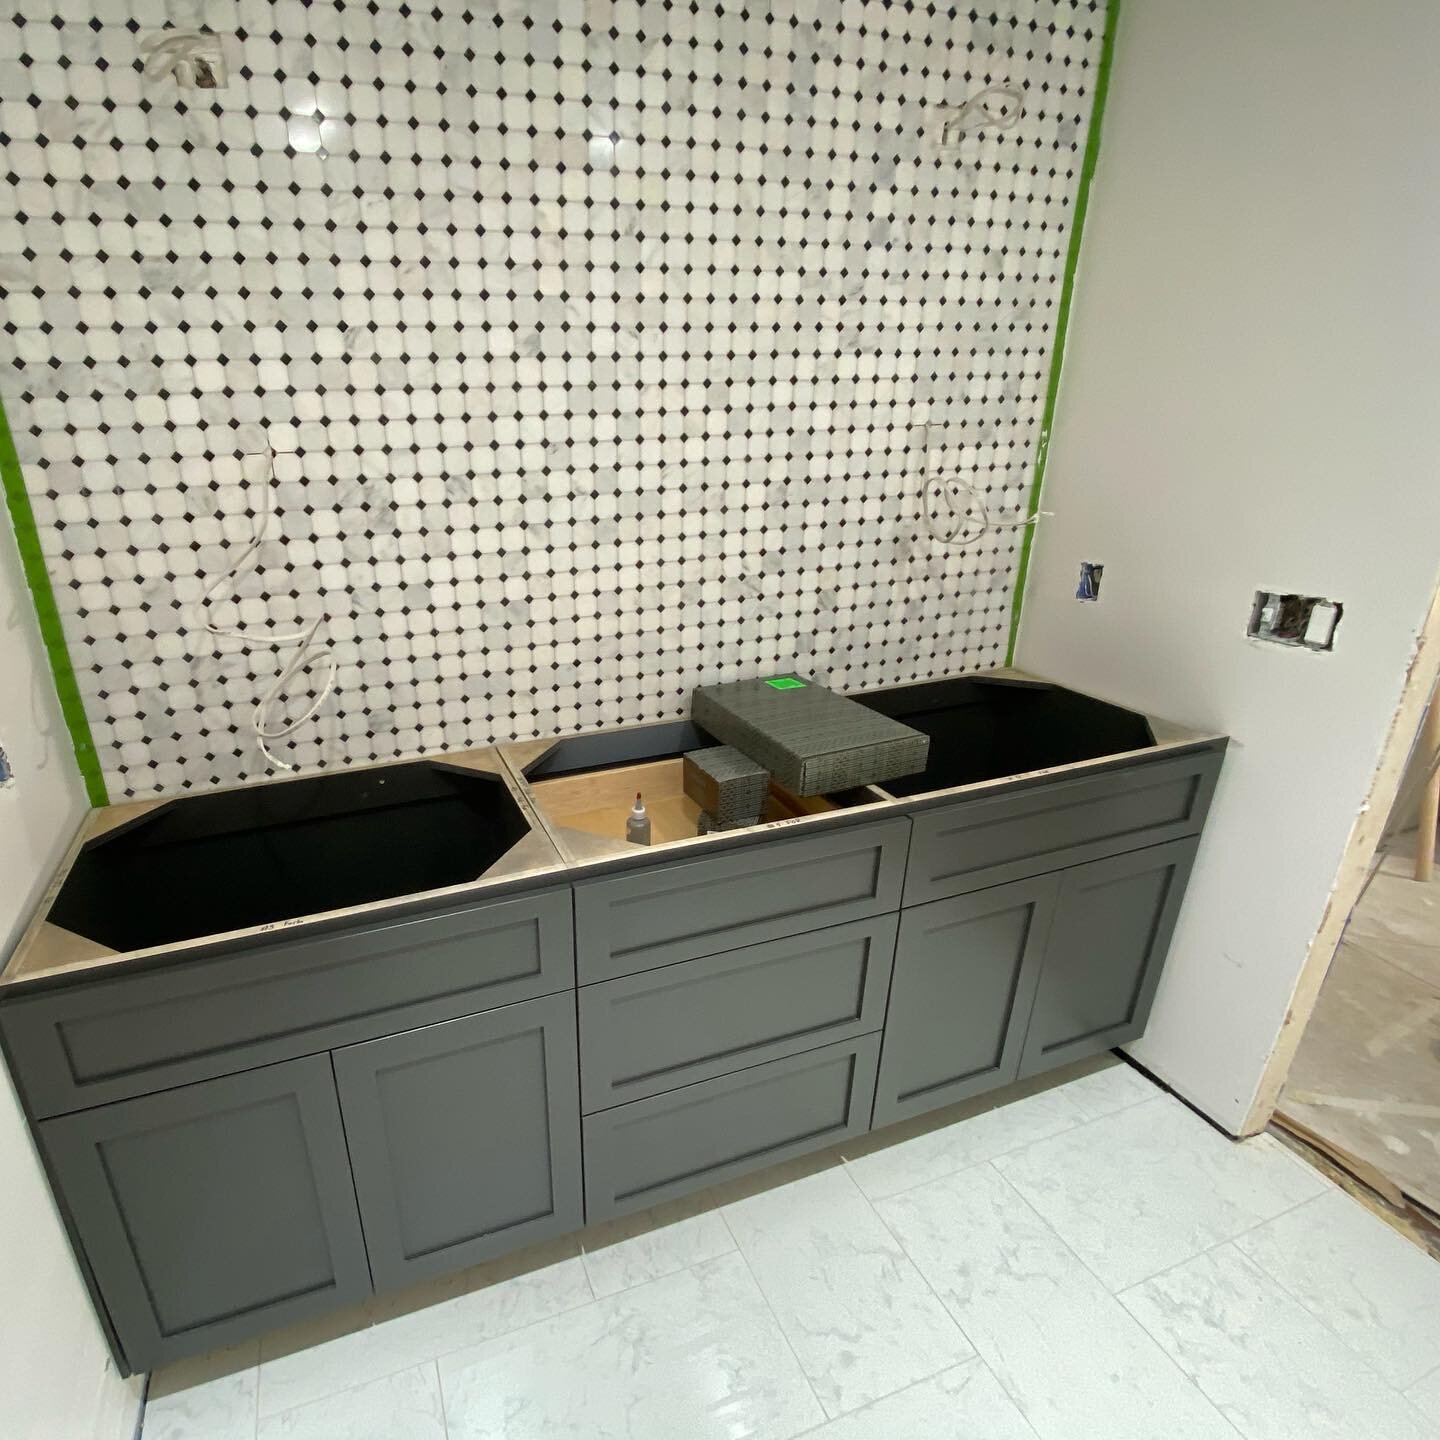 A beautiful vanity cabinet by @swincraftcabinets This vanity and shower bench seat will get a beautiful quartz top, and the vanity will receive a tower extending to the ceiling.